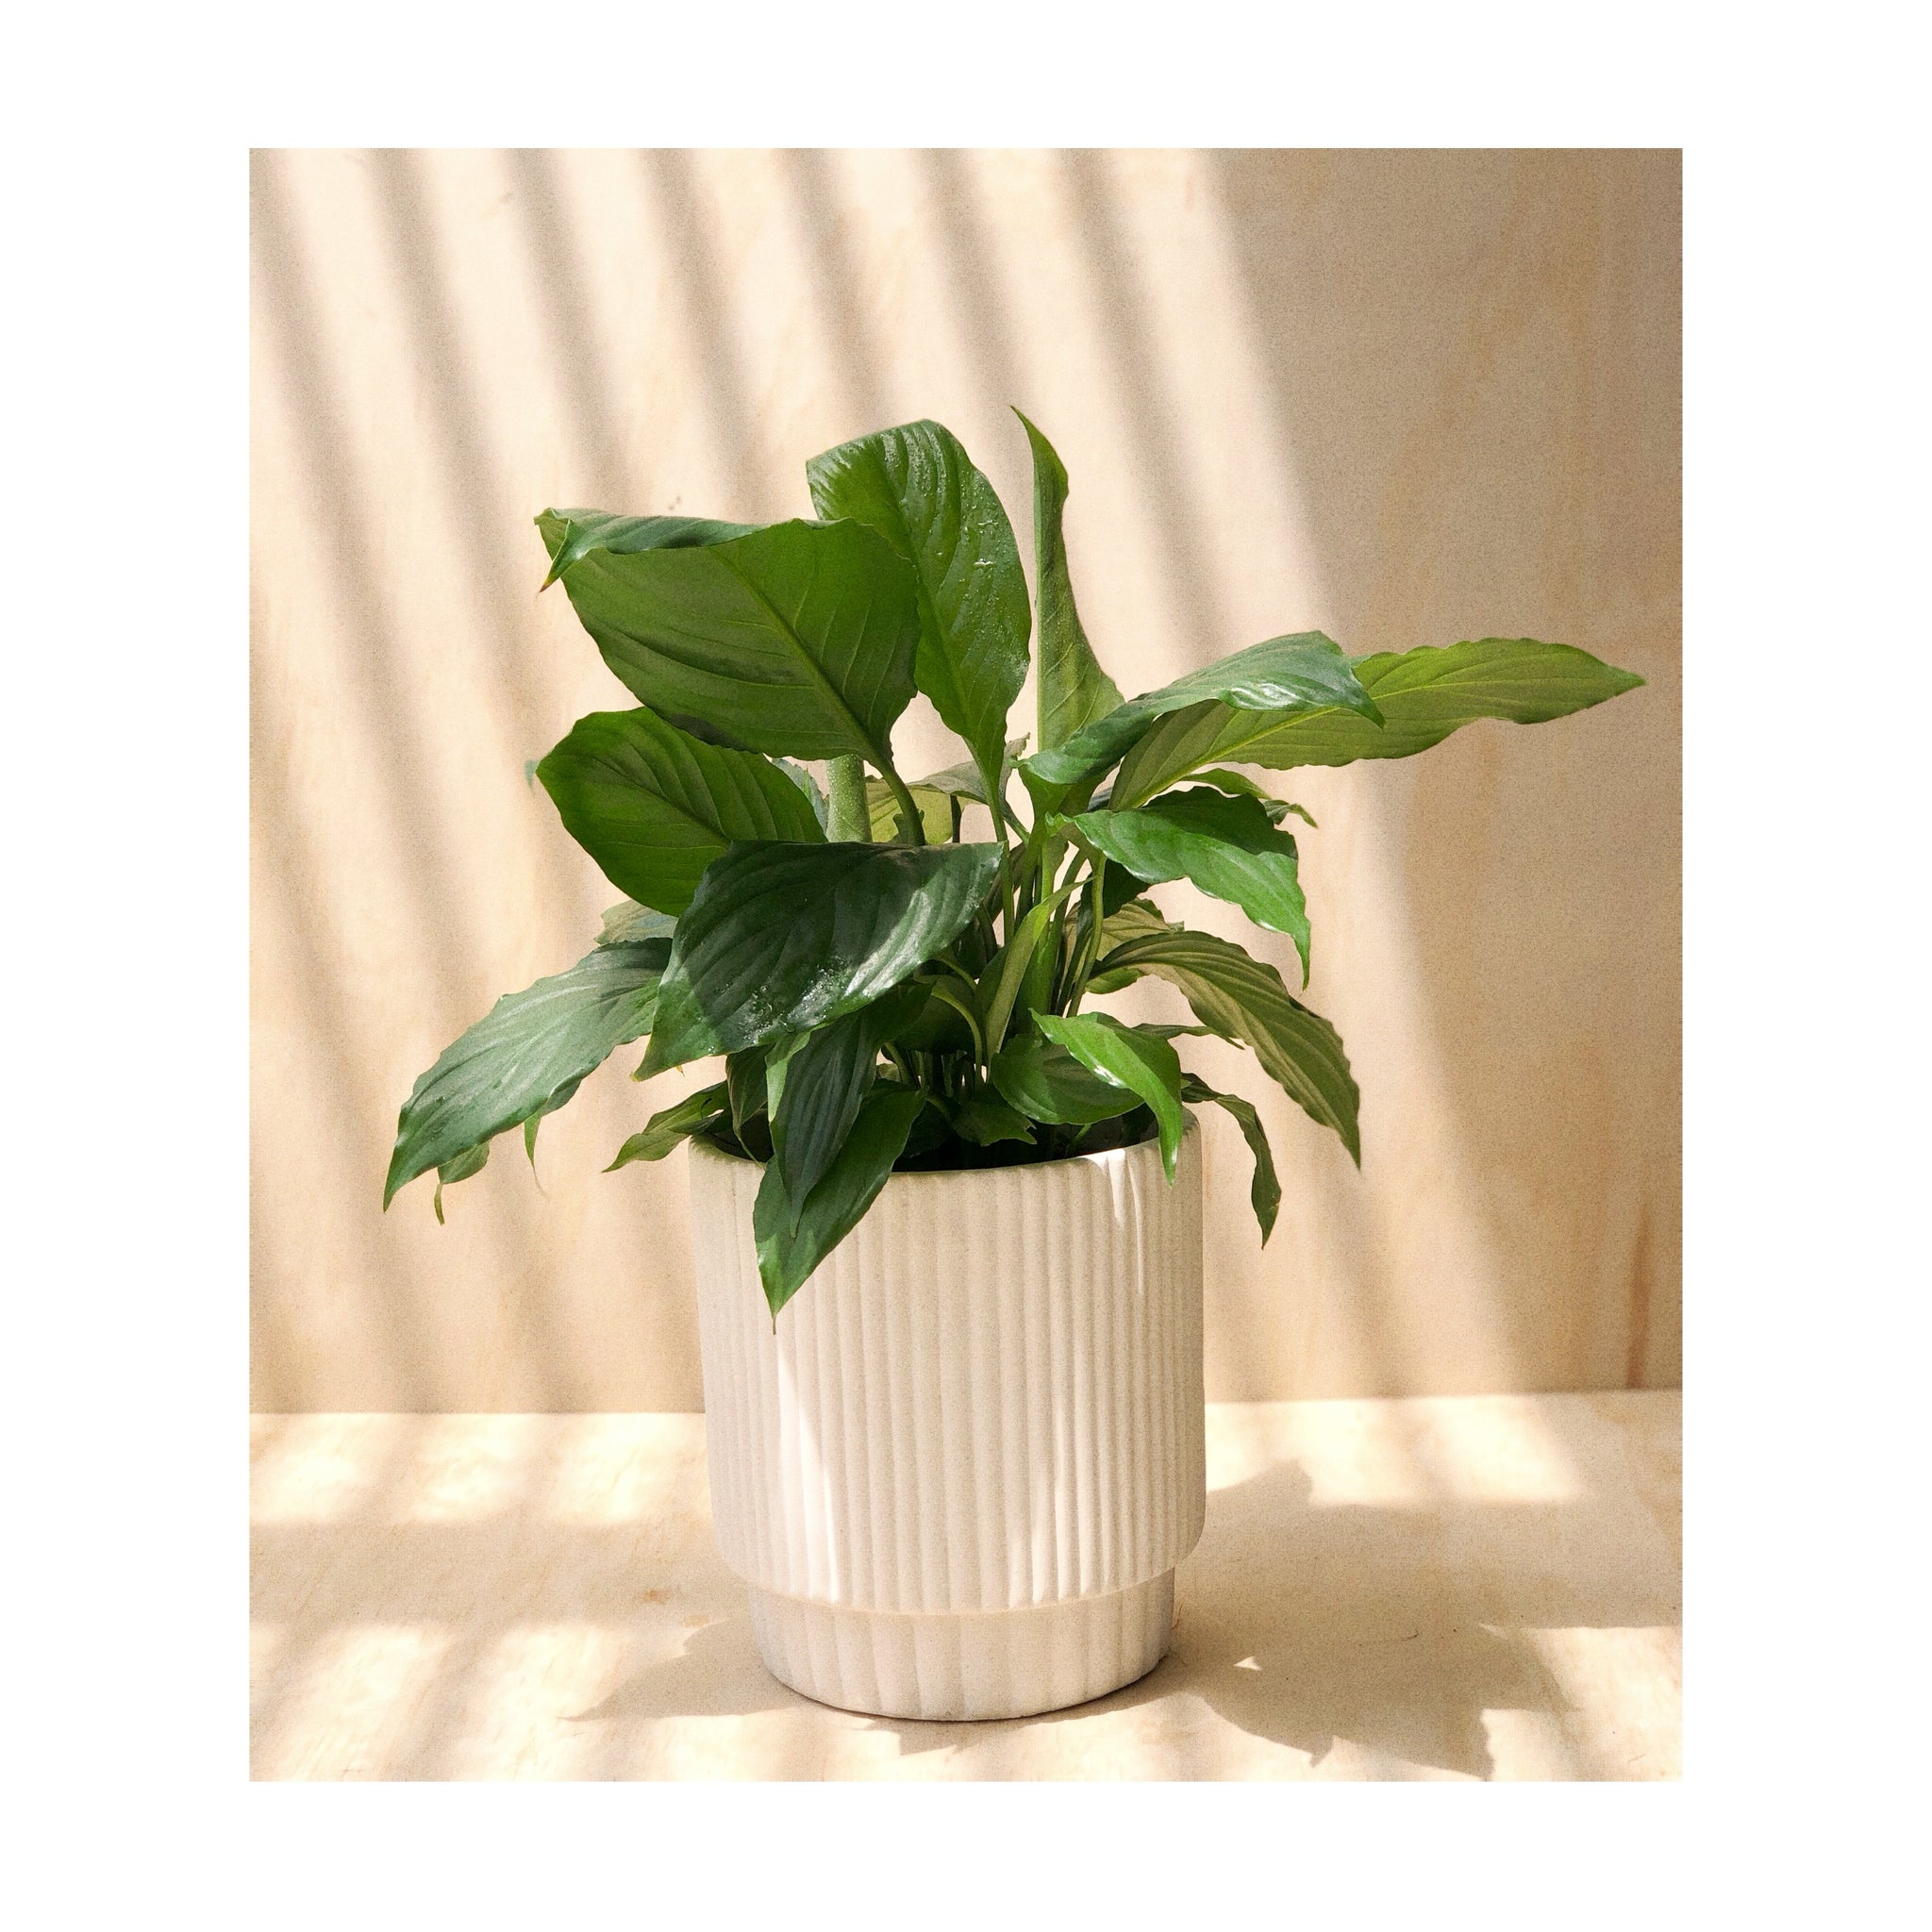 Maja Cement Pot Cream with Peace Lily (Spathiphyllum)